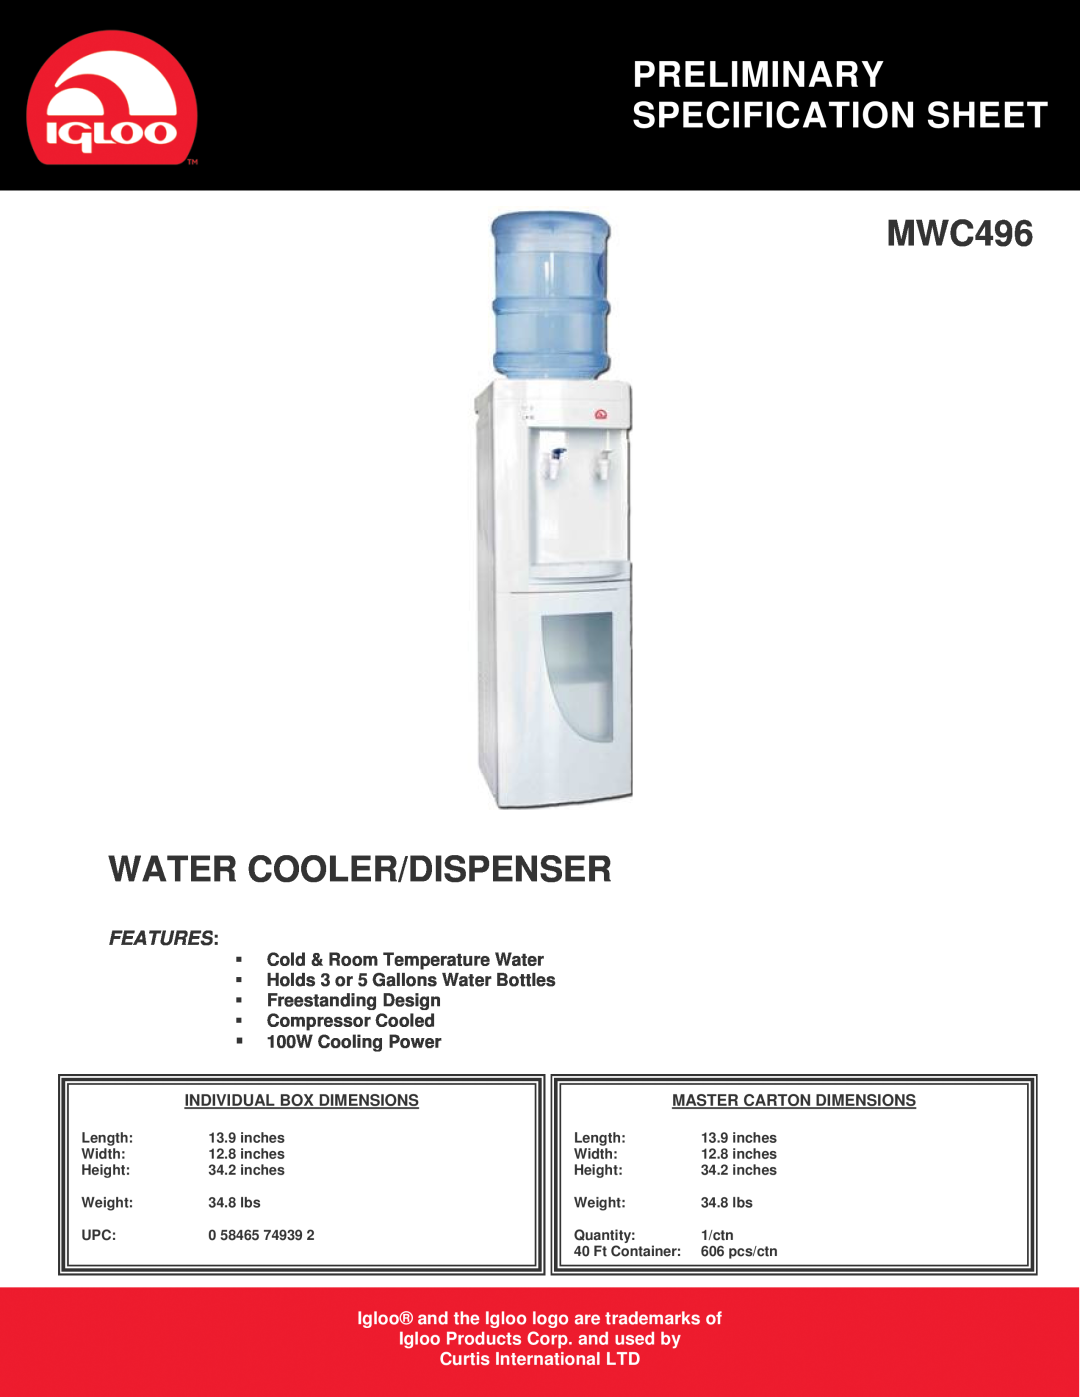 Igloo specifications Preliminary Specification Sheet, MWC496 WATER COOLER/DISPENSER, Features, 100W Cooling Power 